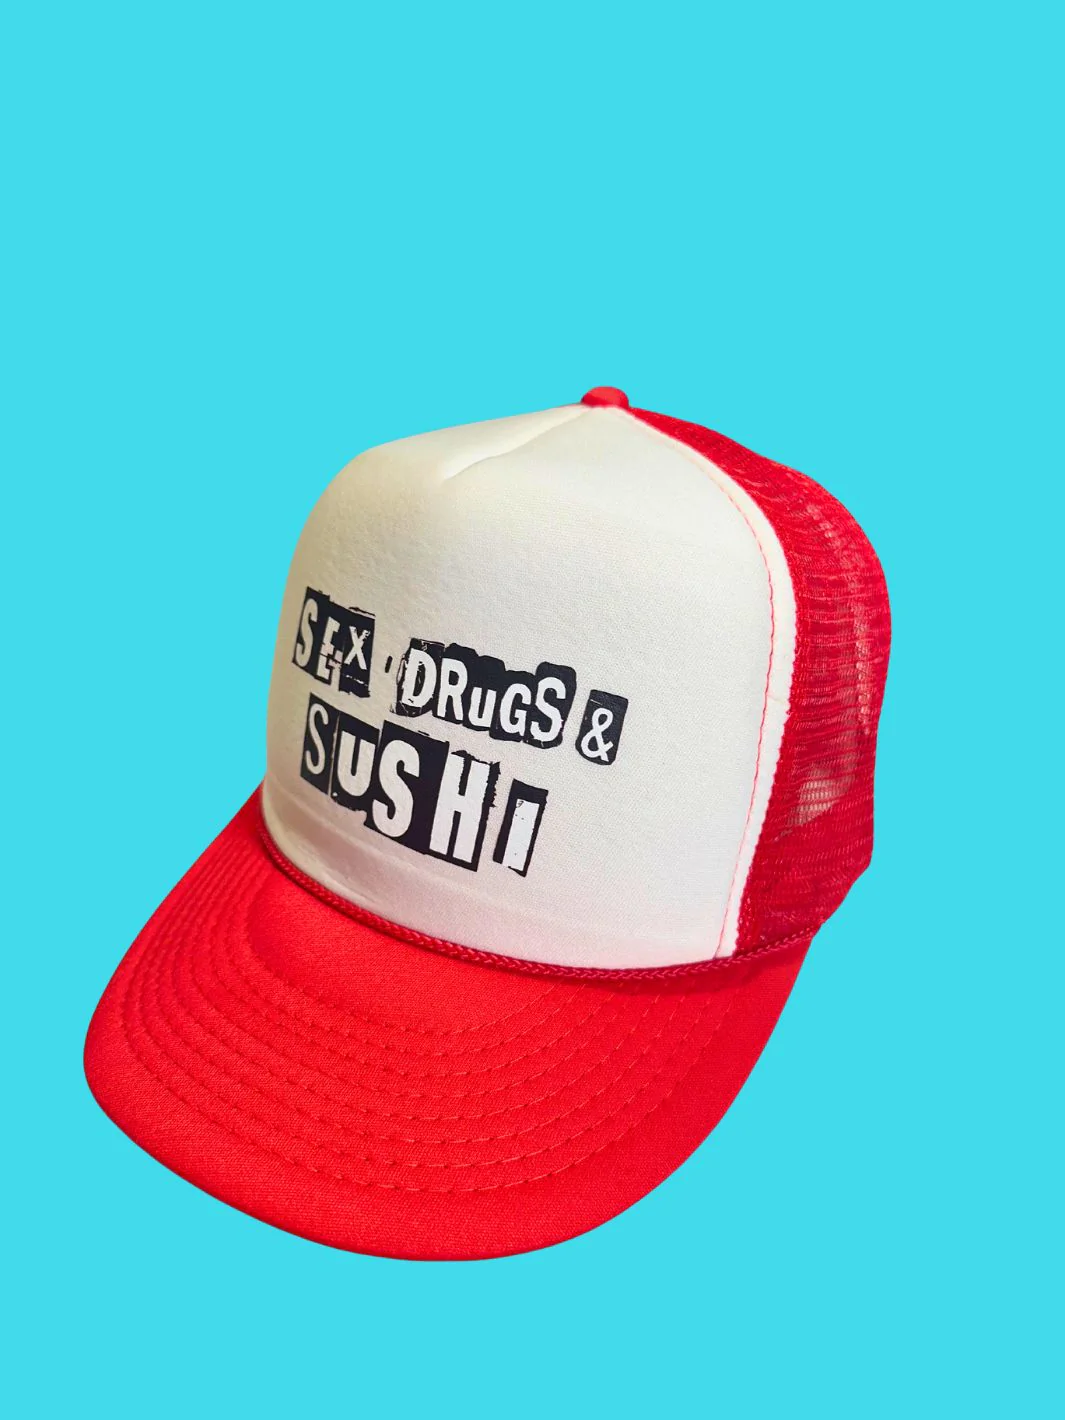 Sex Drugs and Sushi Mesh Hat